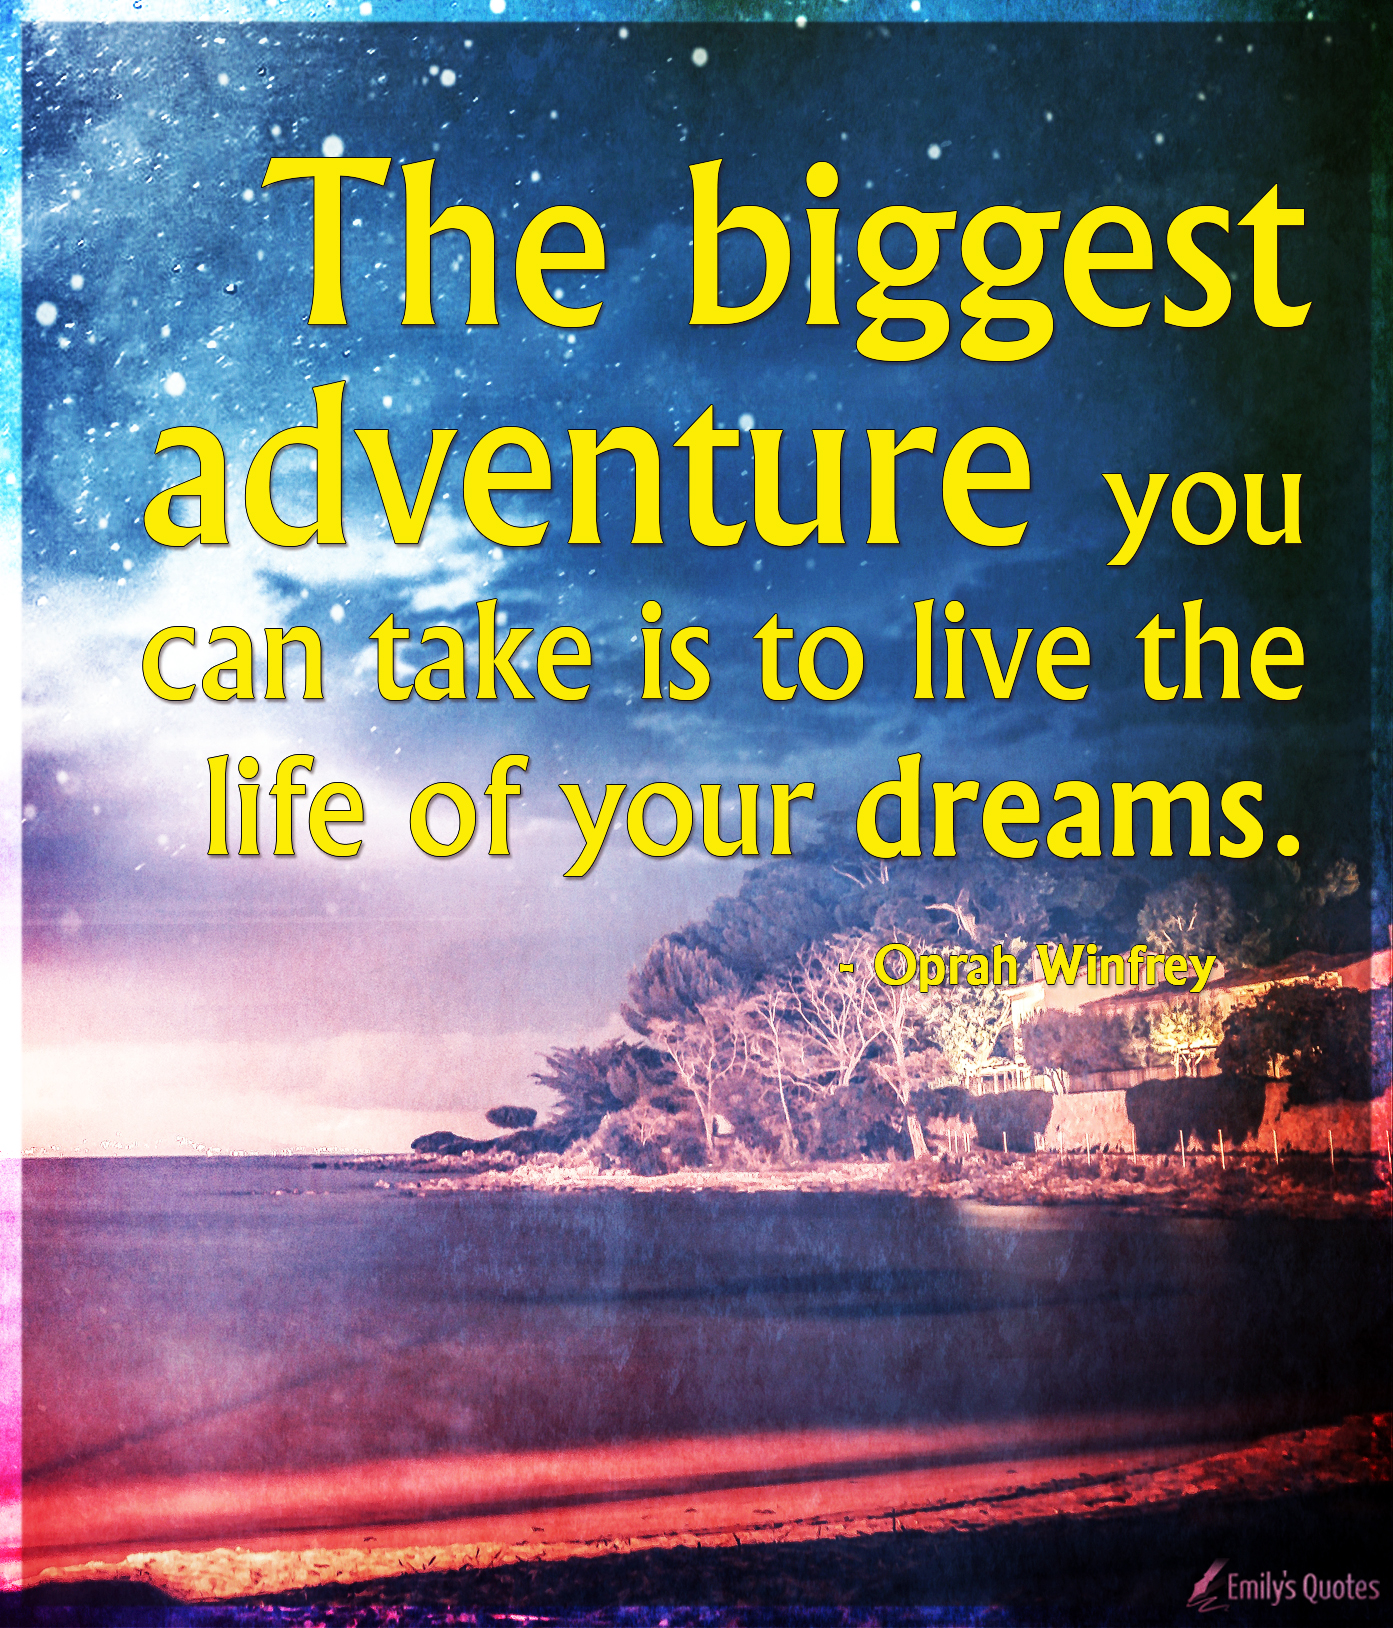 the-biggest-adventure-you-can-take-is-to-live-the-life-of-your-dreams